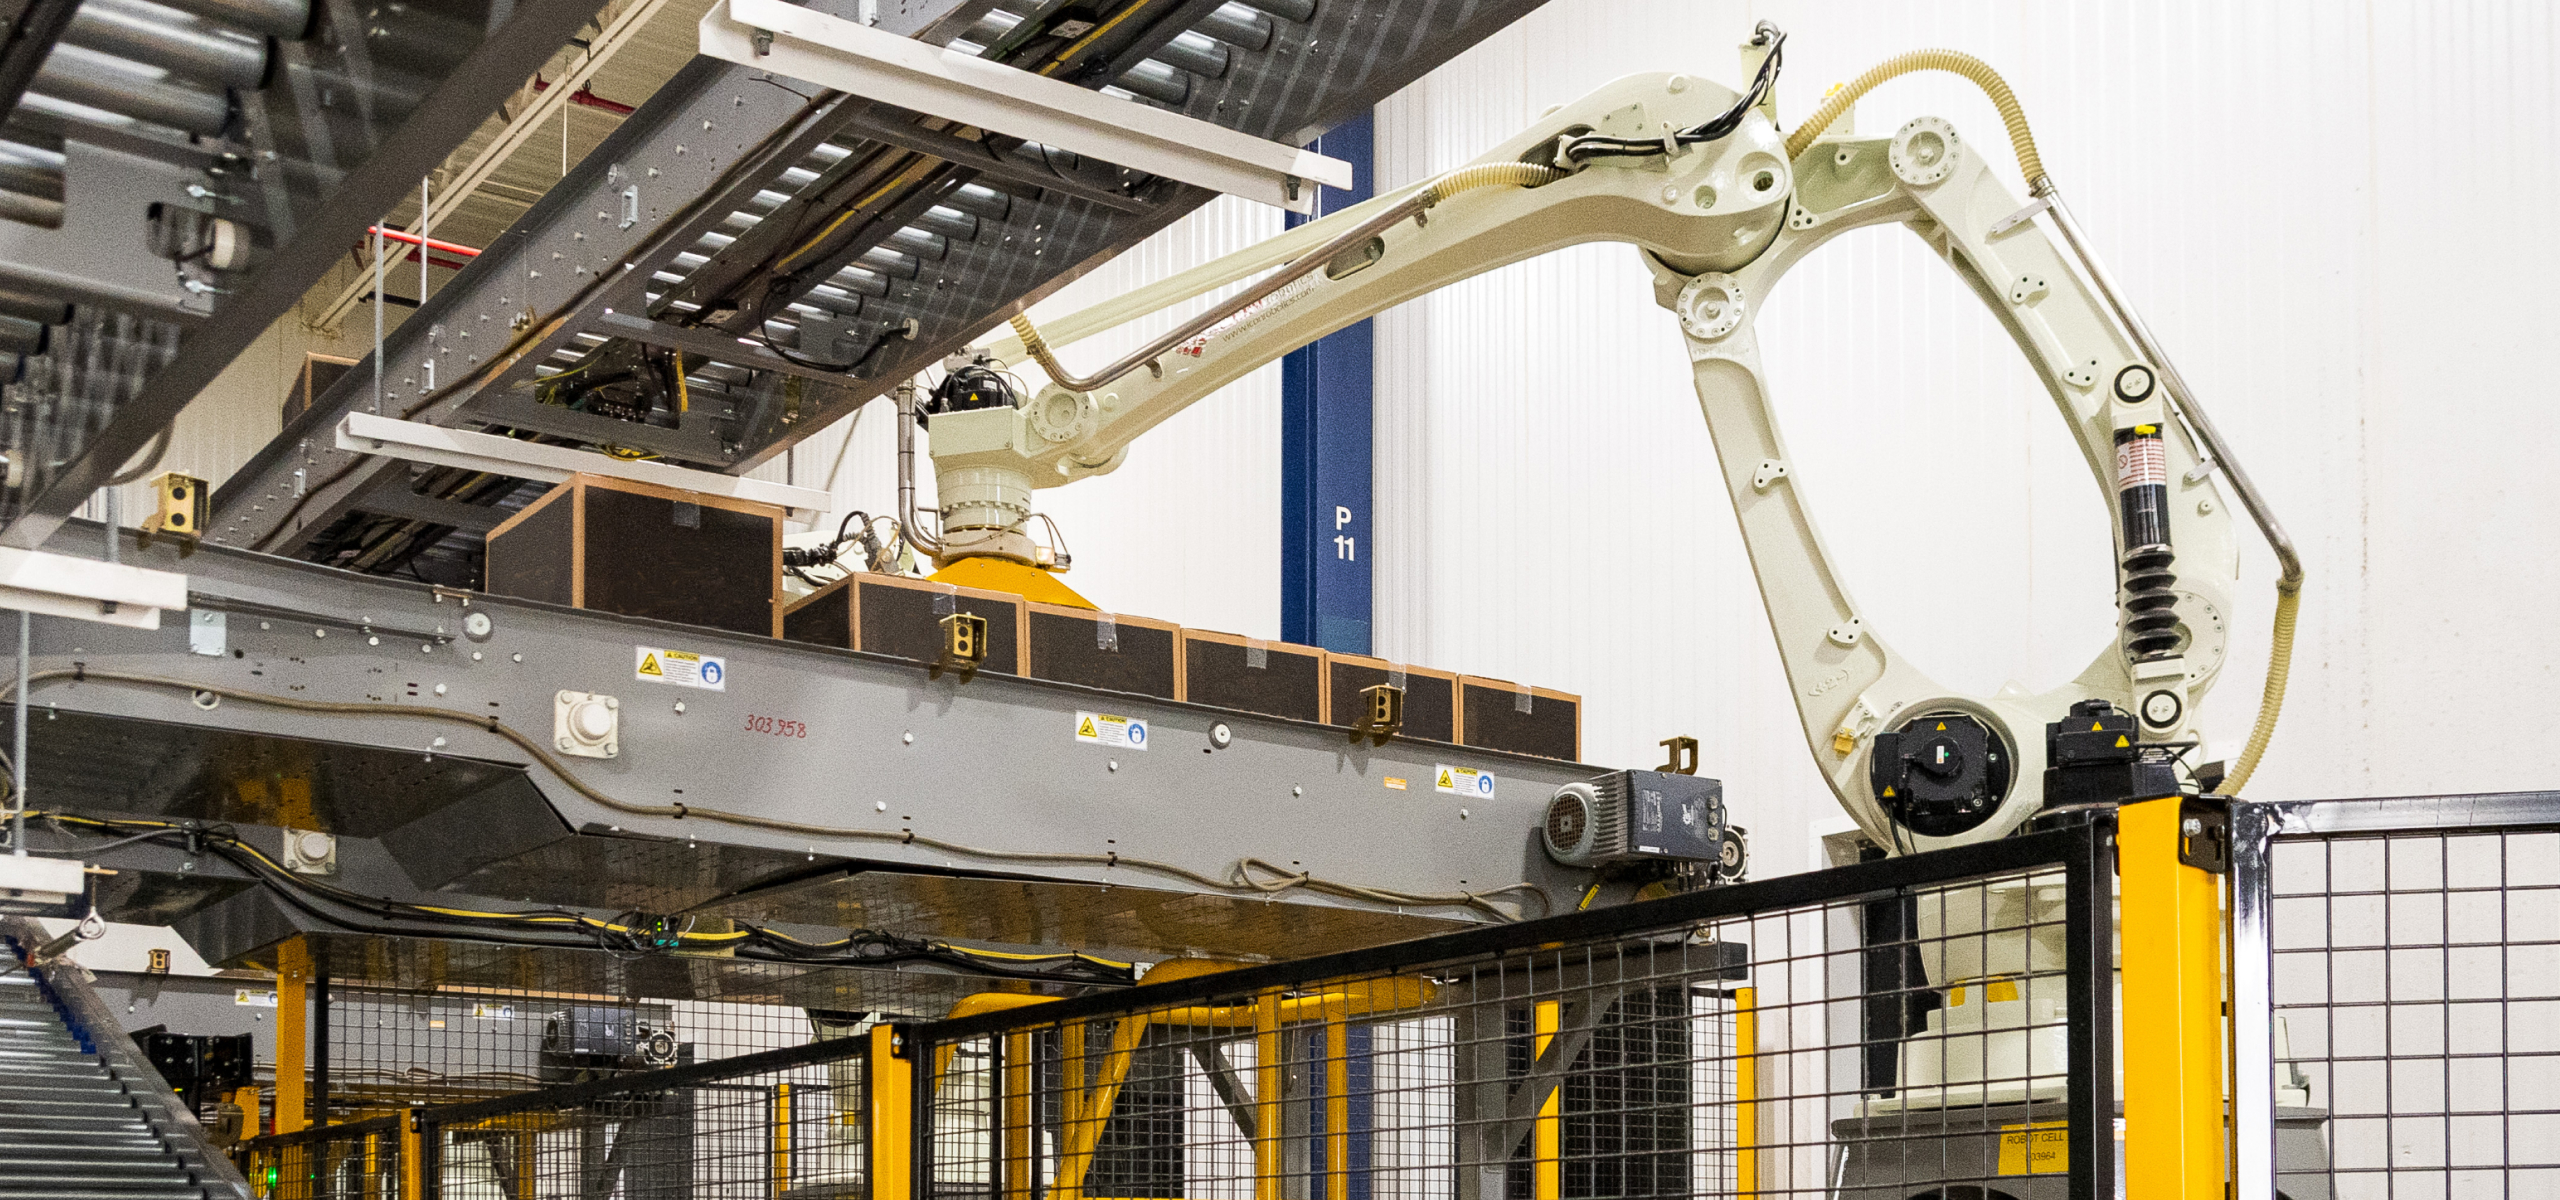 Robotic arm moving boxes on the factory floor